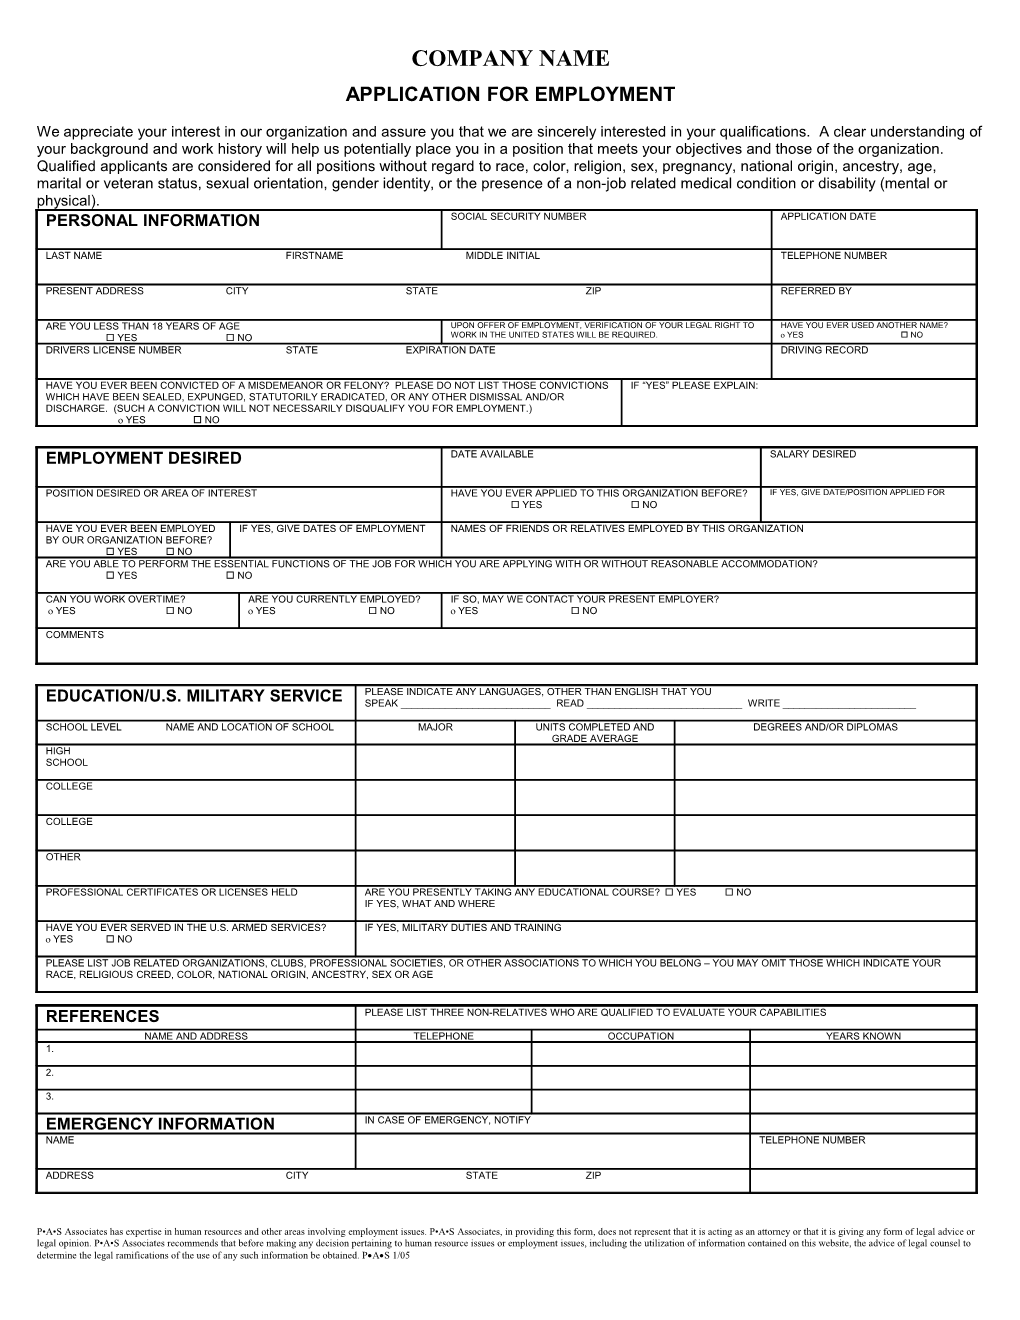 Application for Employment s160